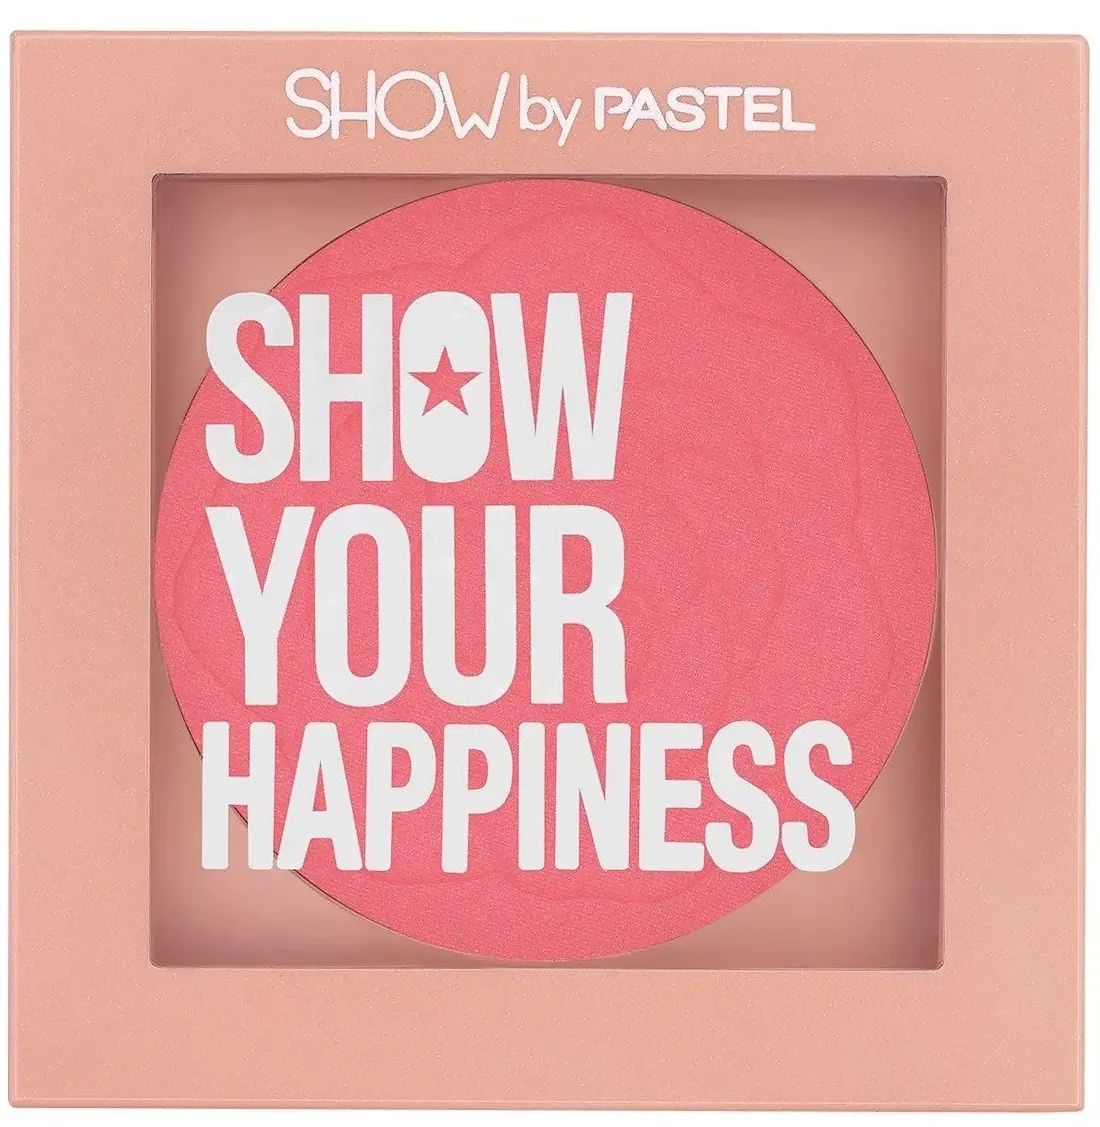 Румяна для лица Pastel Show Your Happiness Blush, 202 Colorful, 4,2 г umbrella of happiness